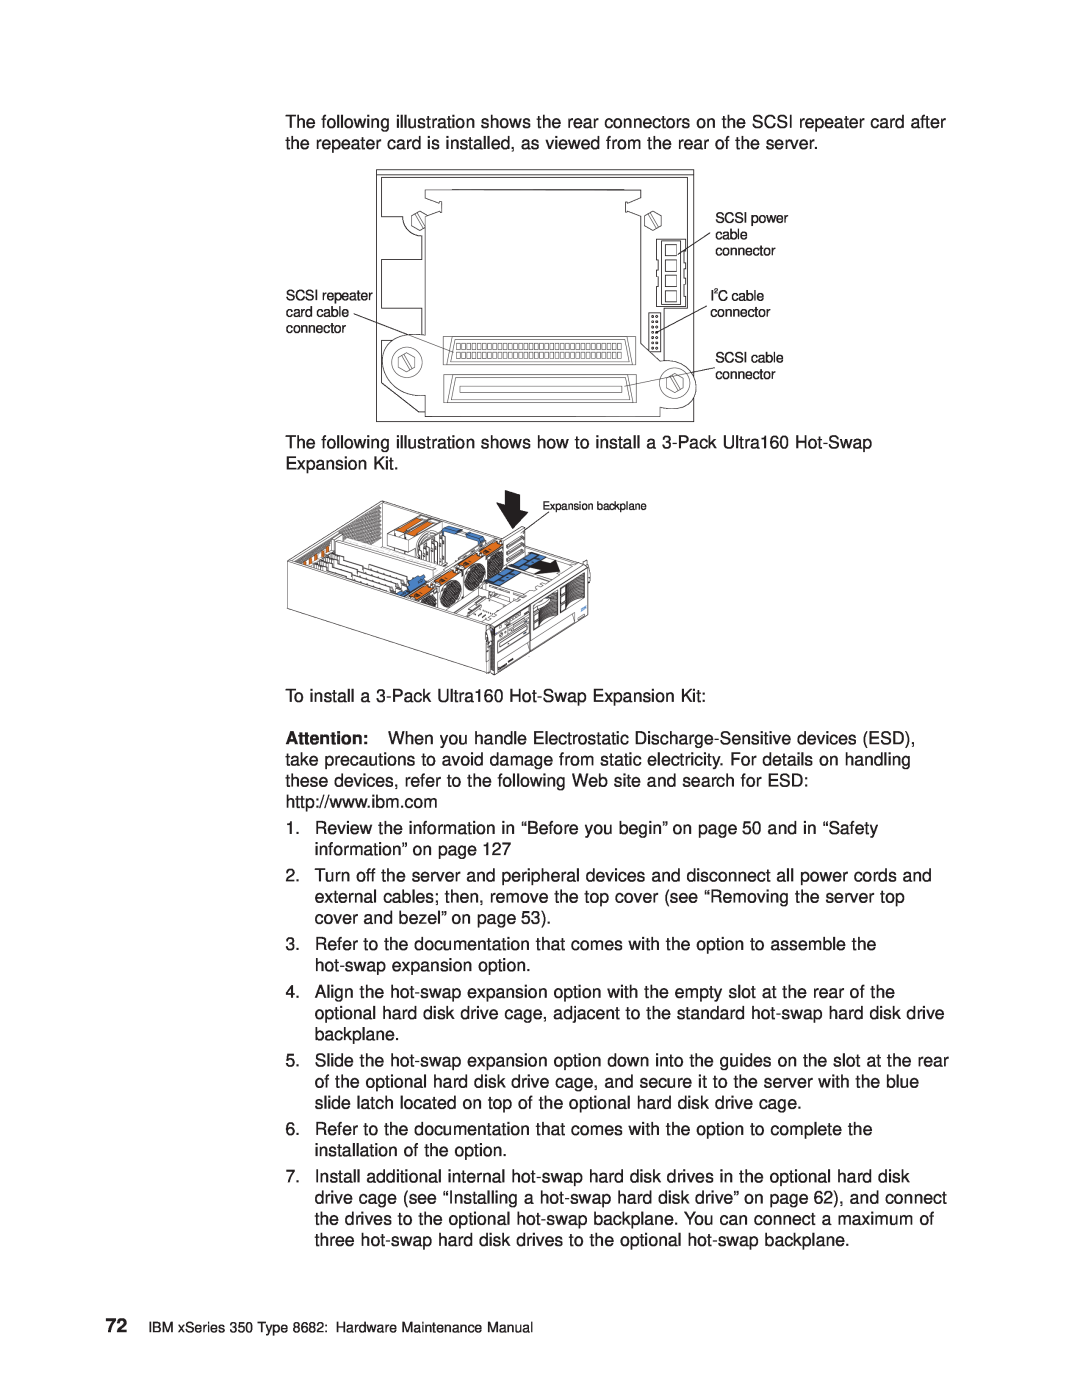 IBM 8682 manual To install a 3-Pack Ultra160 Hot-Swap Expansion Kit 